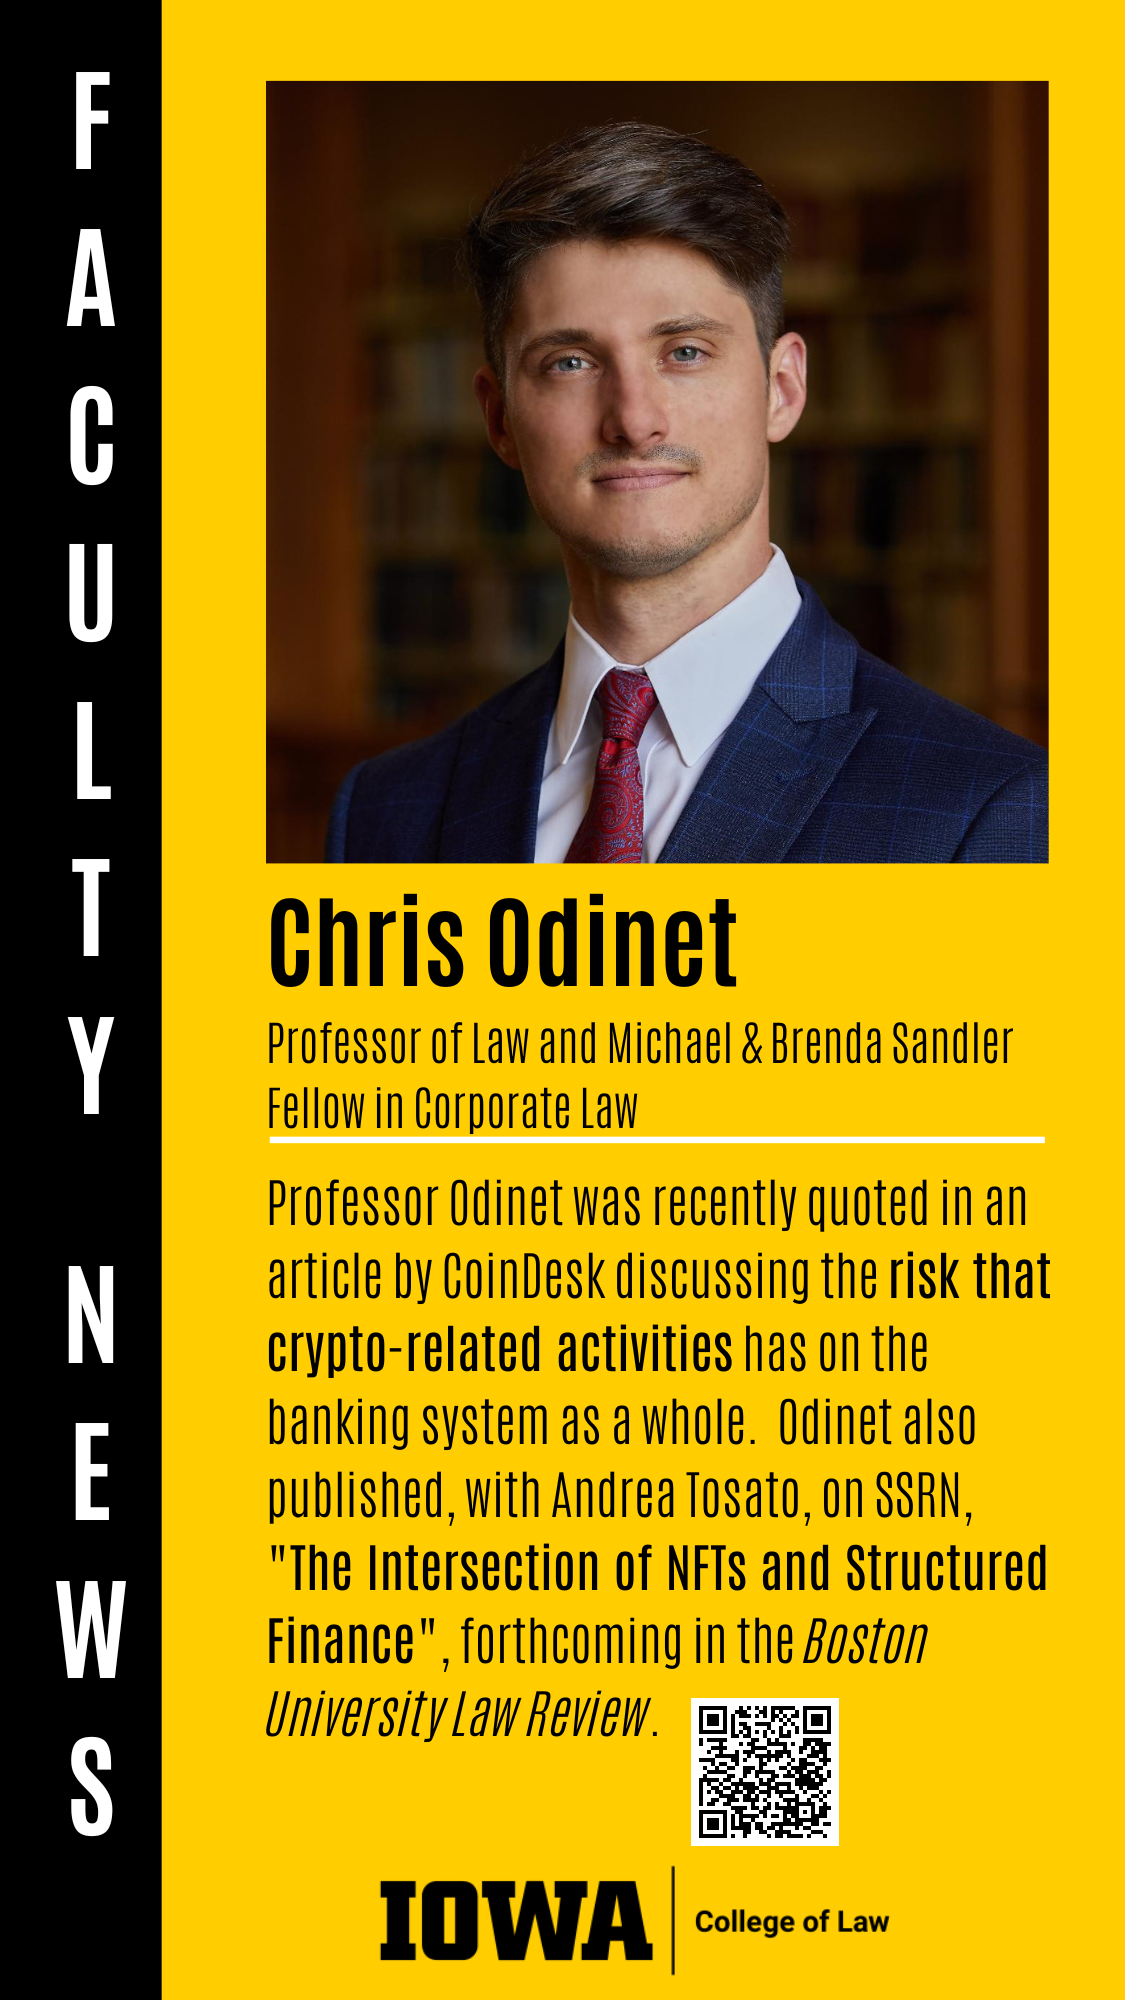 chrisProfessor of Law and Michael & Brenda Sandler Fellow in Corporate Law Professor Odinet was recently quoted in an article by CoinDesk discussing the risk that crypto-related activities has on the banking system as a whole.  Odinet also published, with Andrea Tosato, on SSRN, "The Intersection of NFTs and Structured Finance", forthcoming in the Boston University Law Review. Chris Odinet